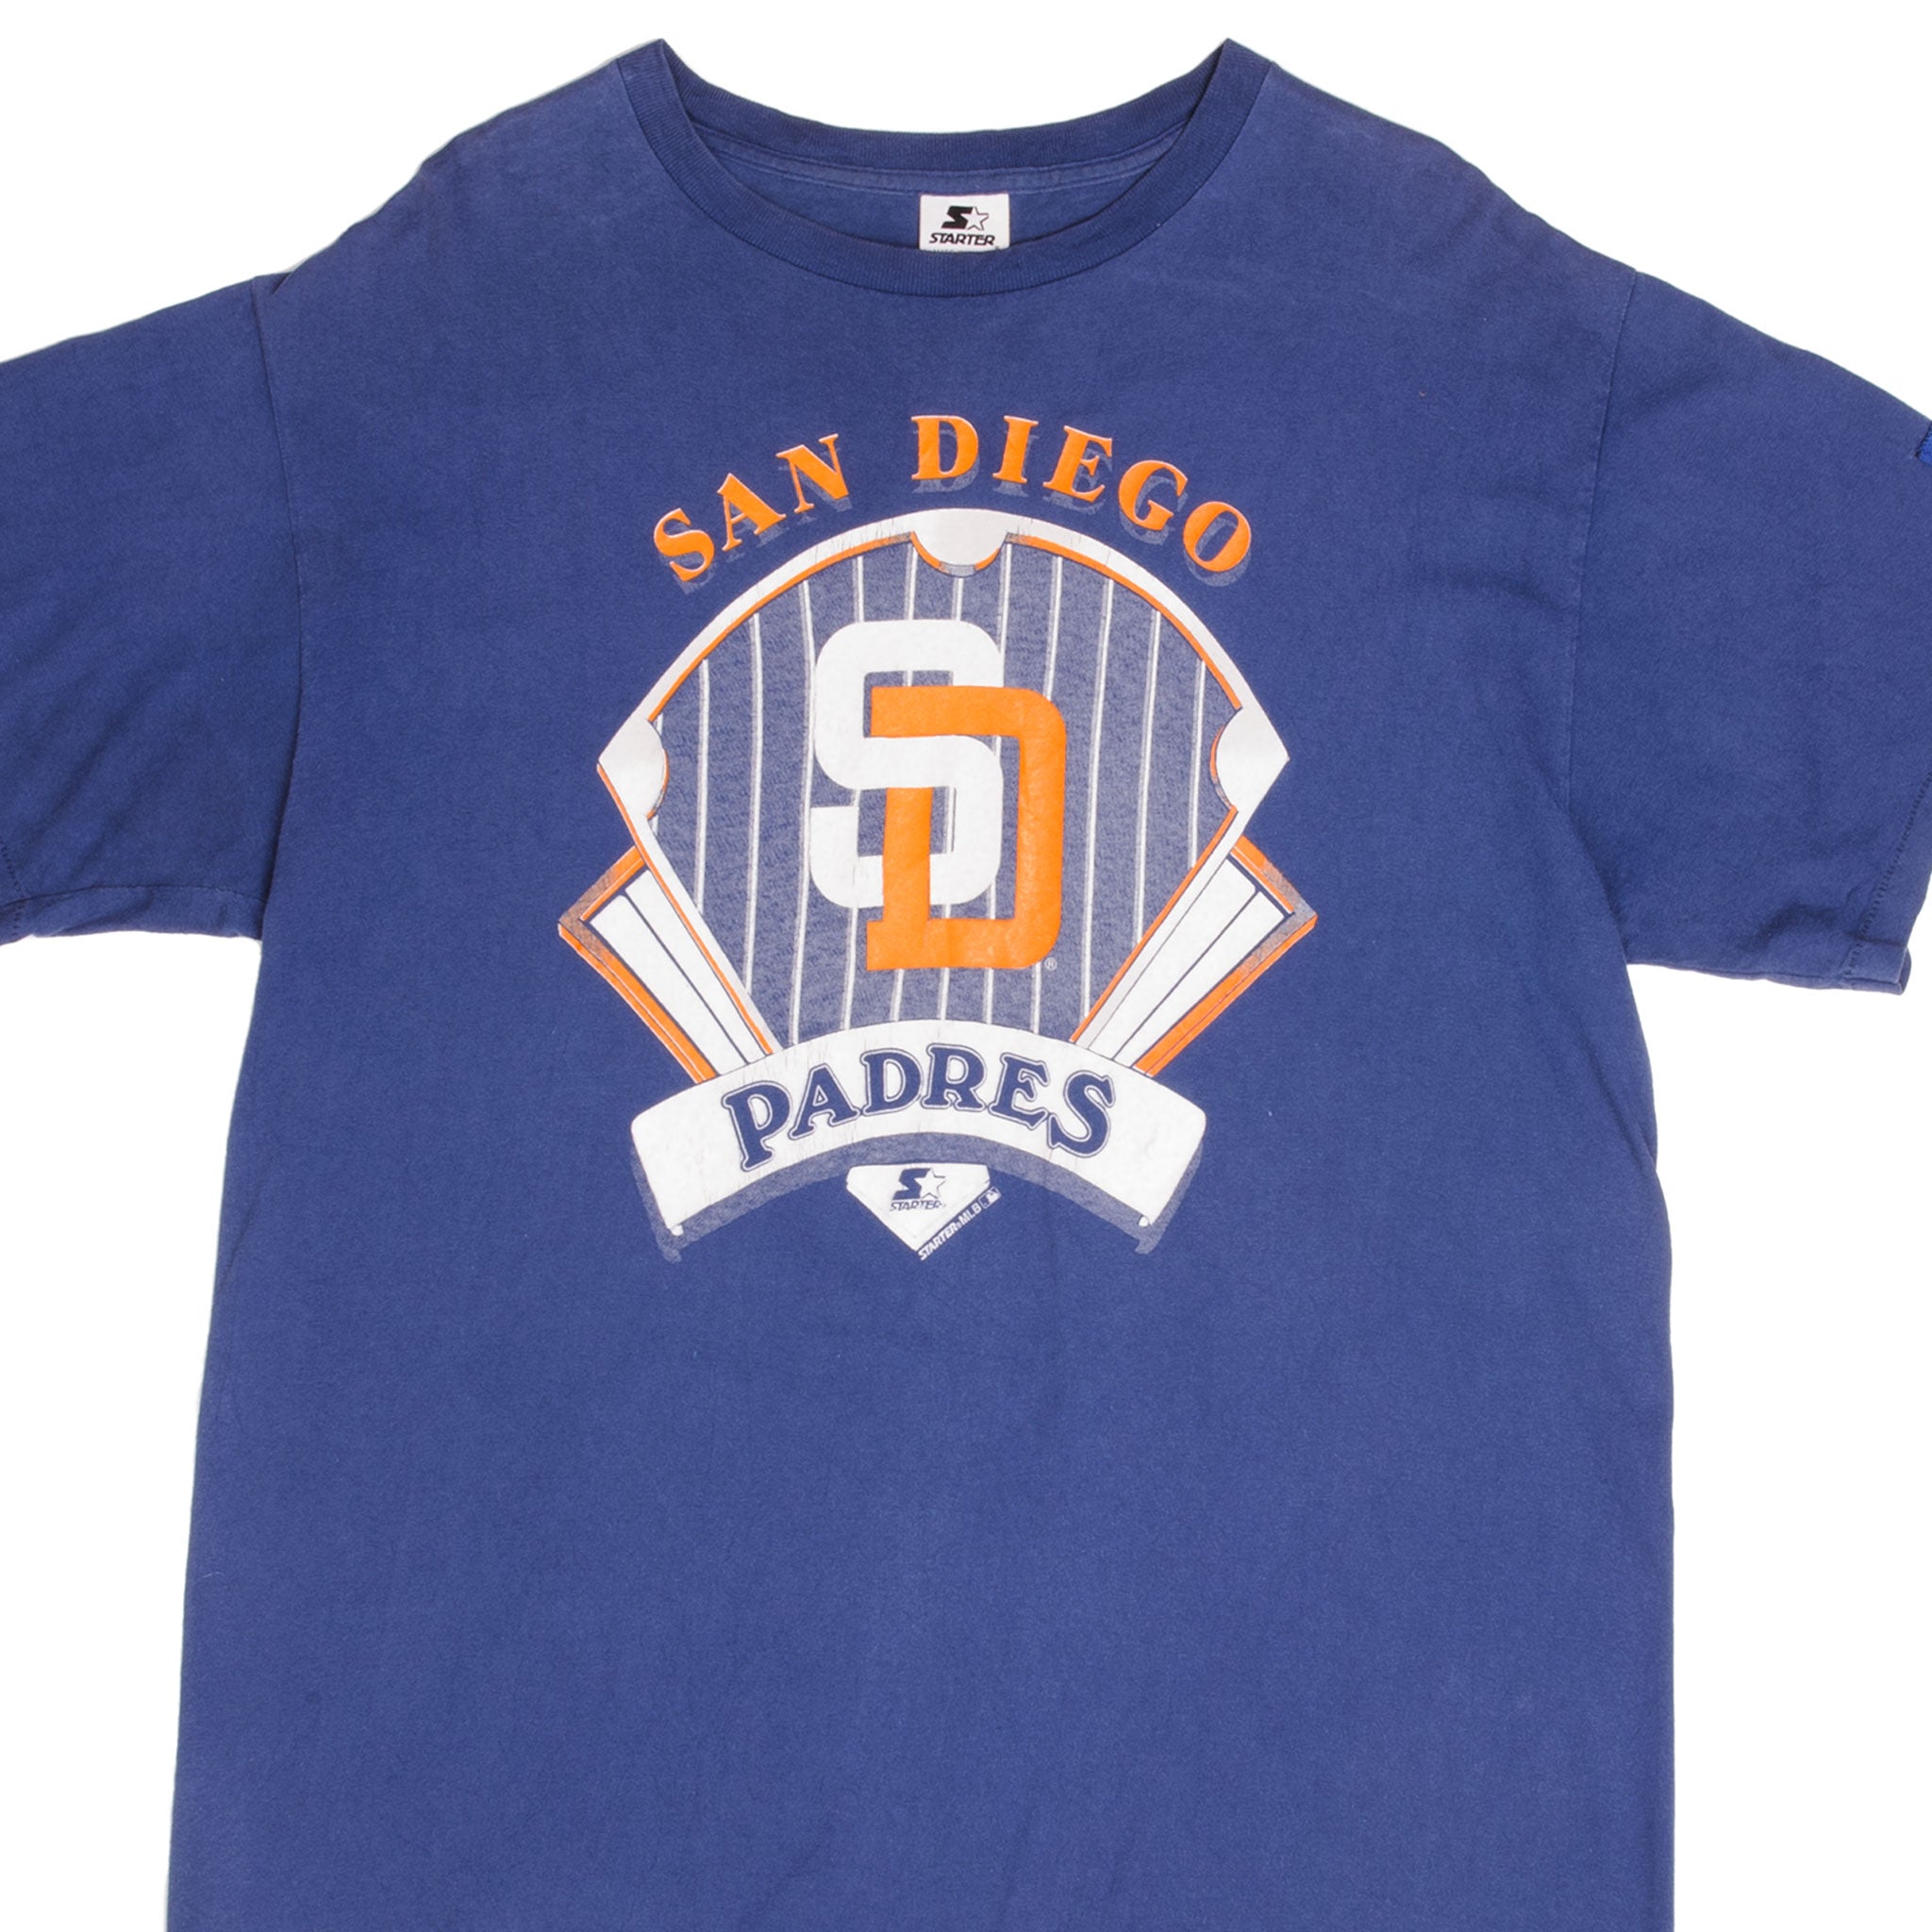 Brooklyn Dodgers Starter T-Shirt by Starter, Made in the USA